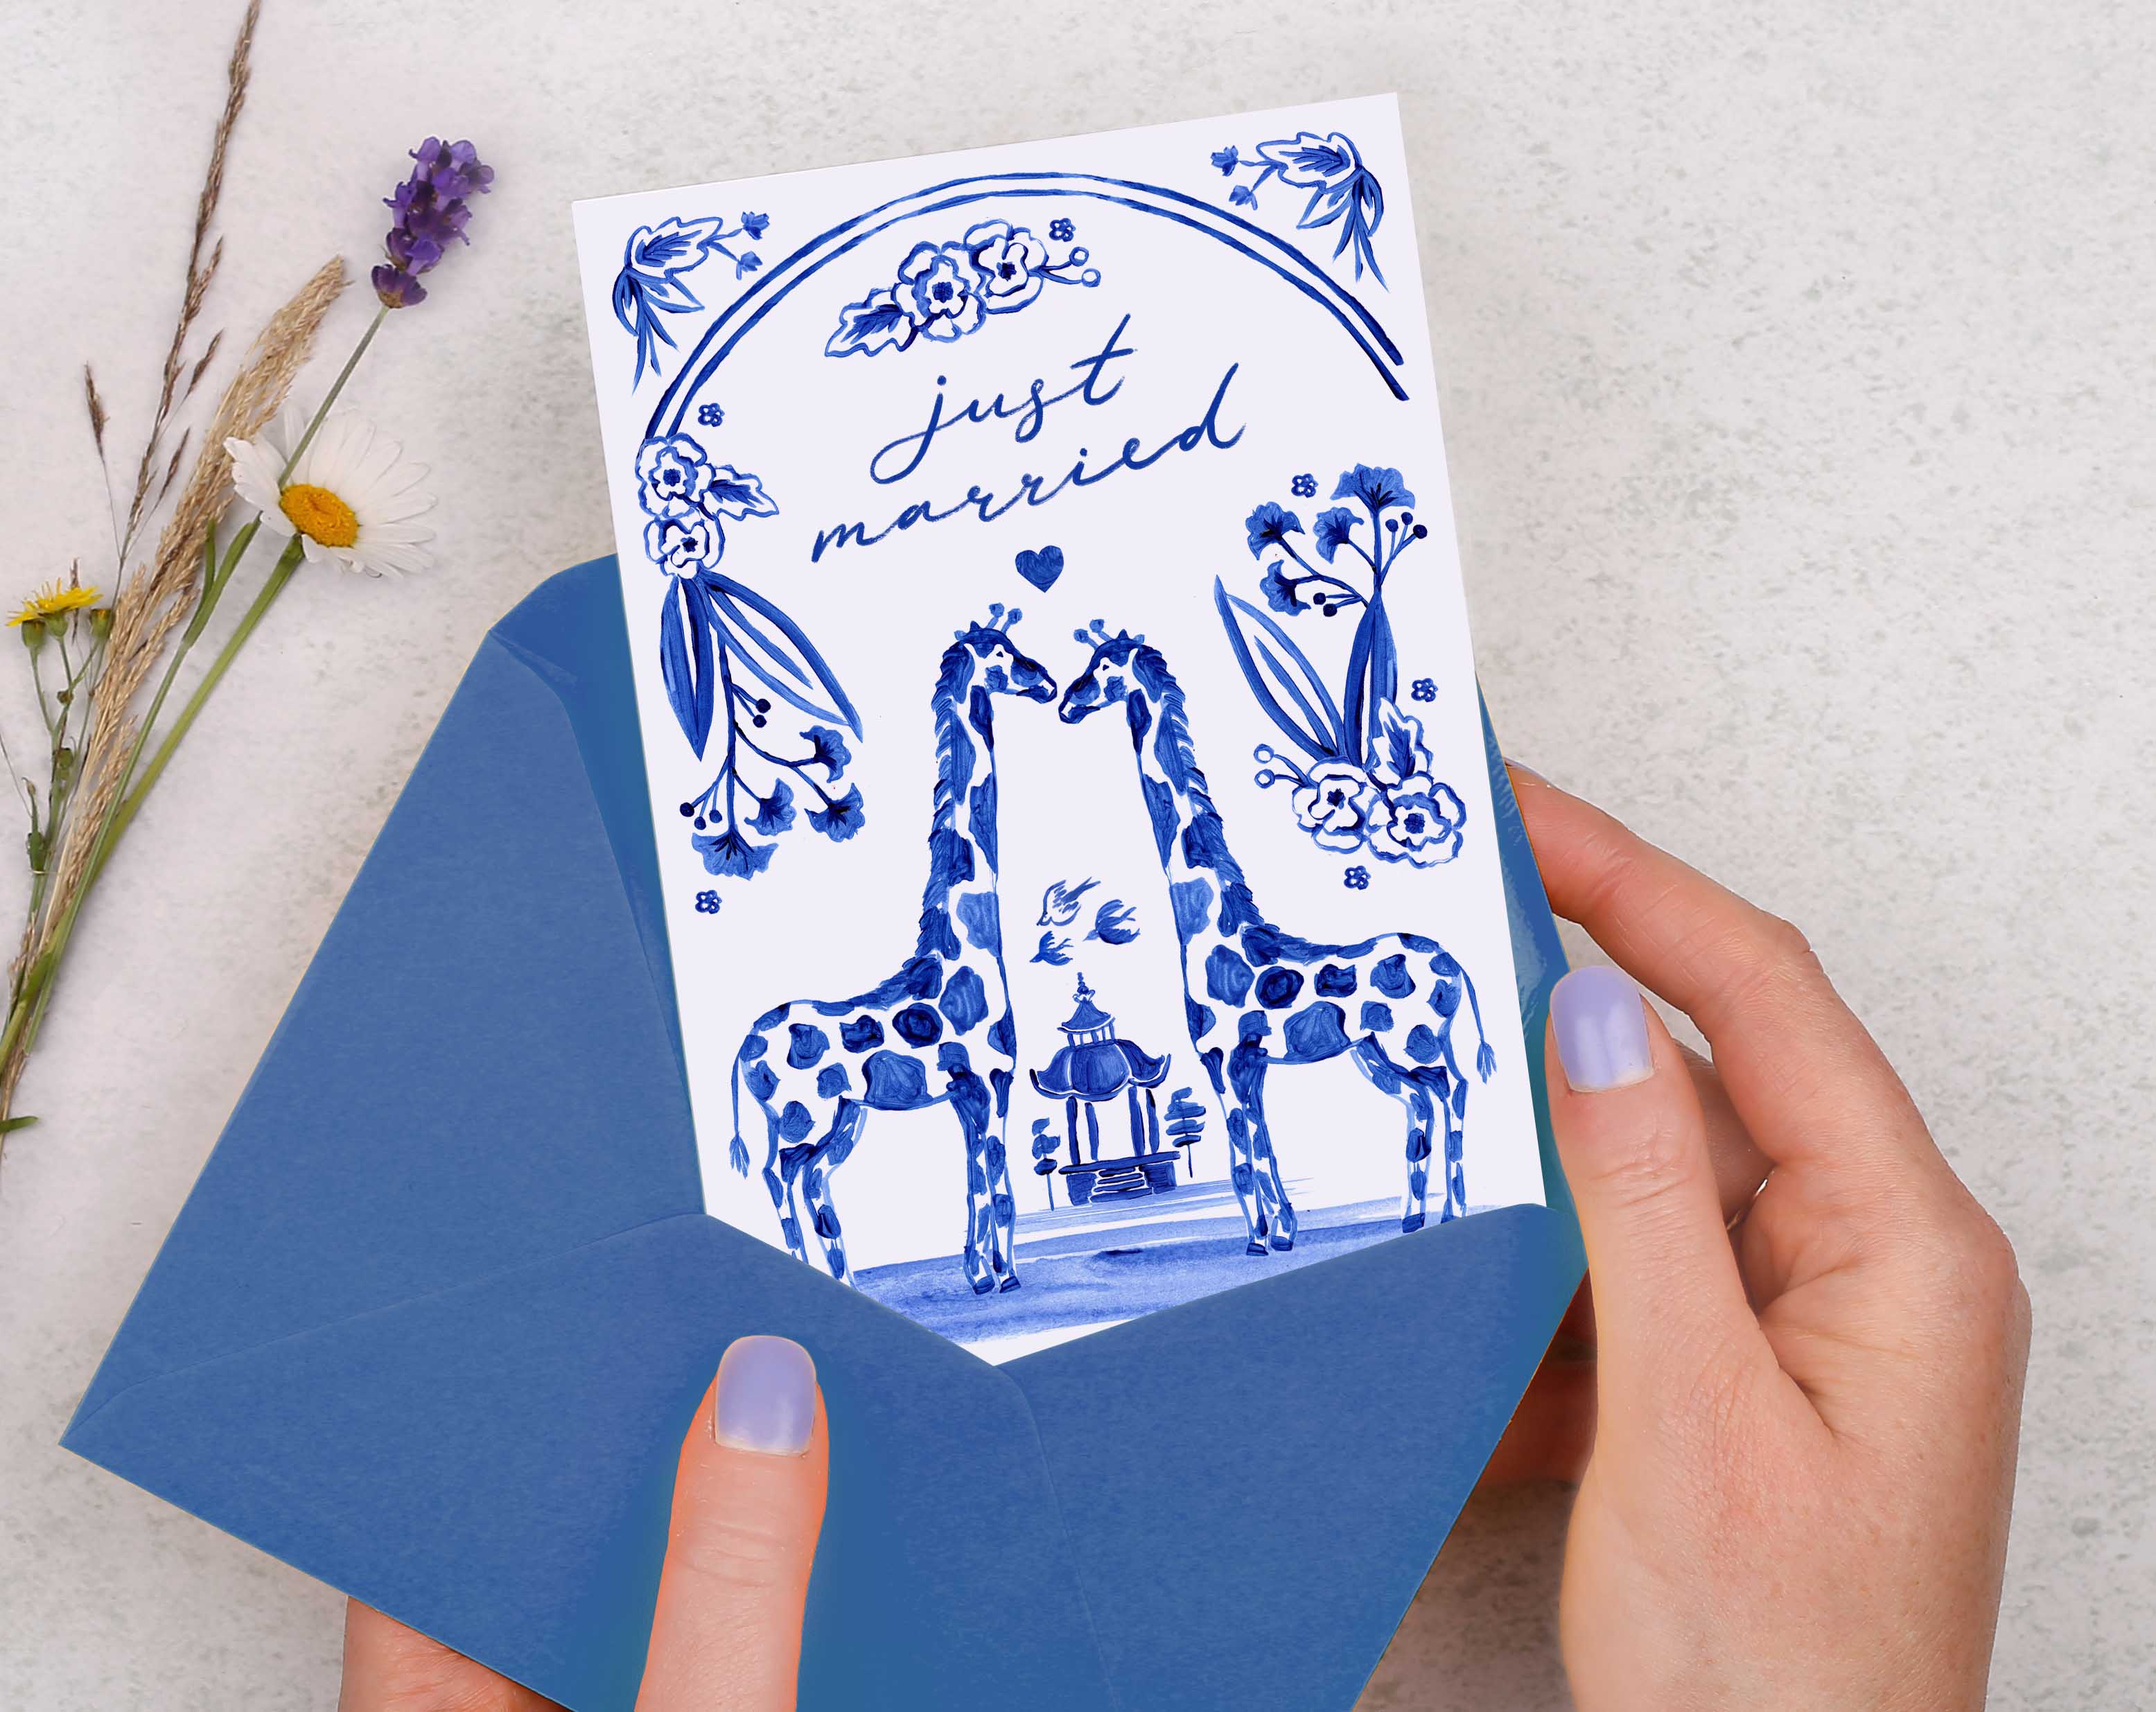 A blue porcelain inspired Just Married Card with 2 hand painted giraffes at the wedding alter.